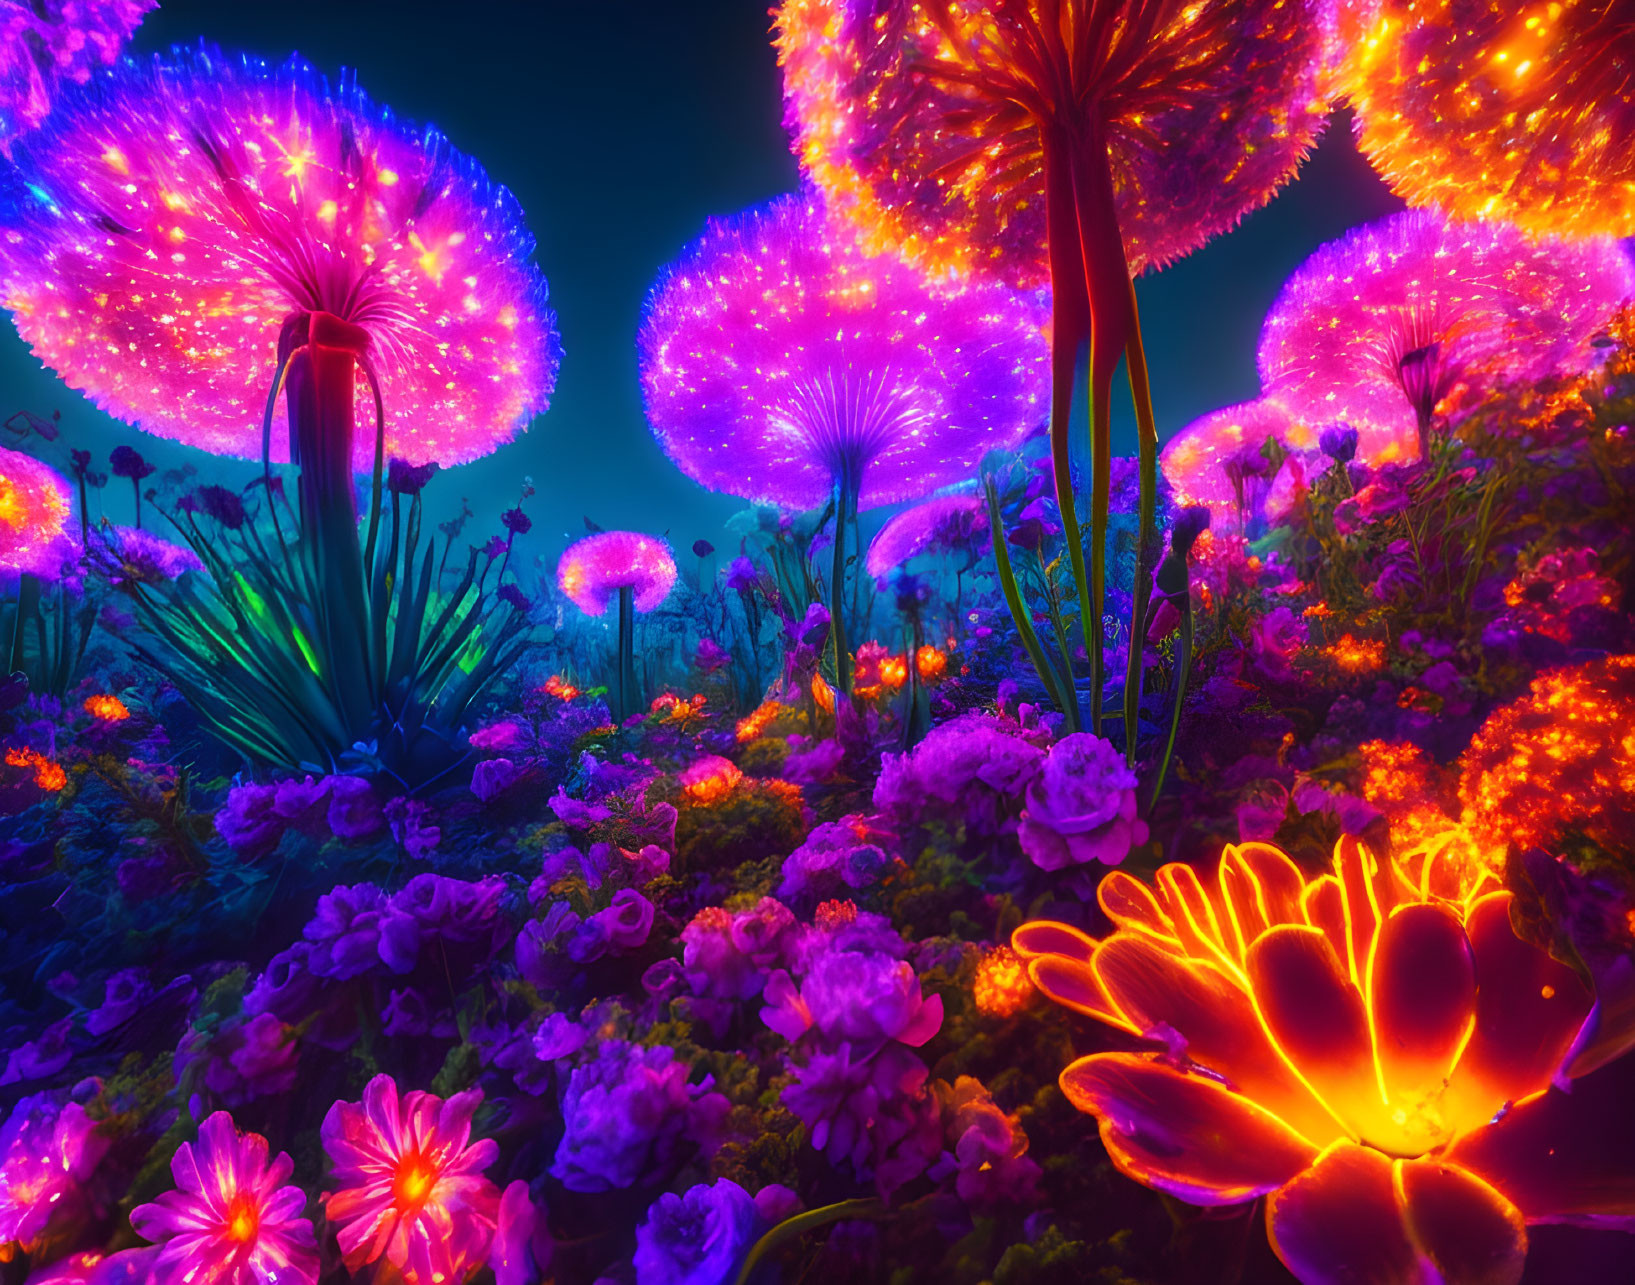 Colorful surreal landscape with neon flower-like structures